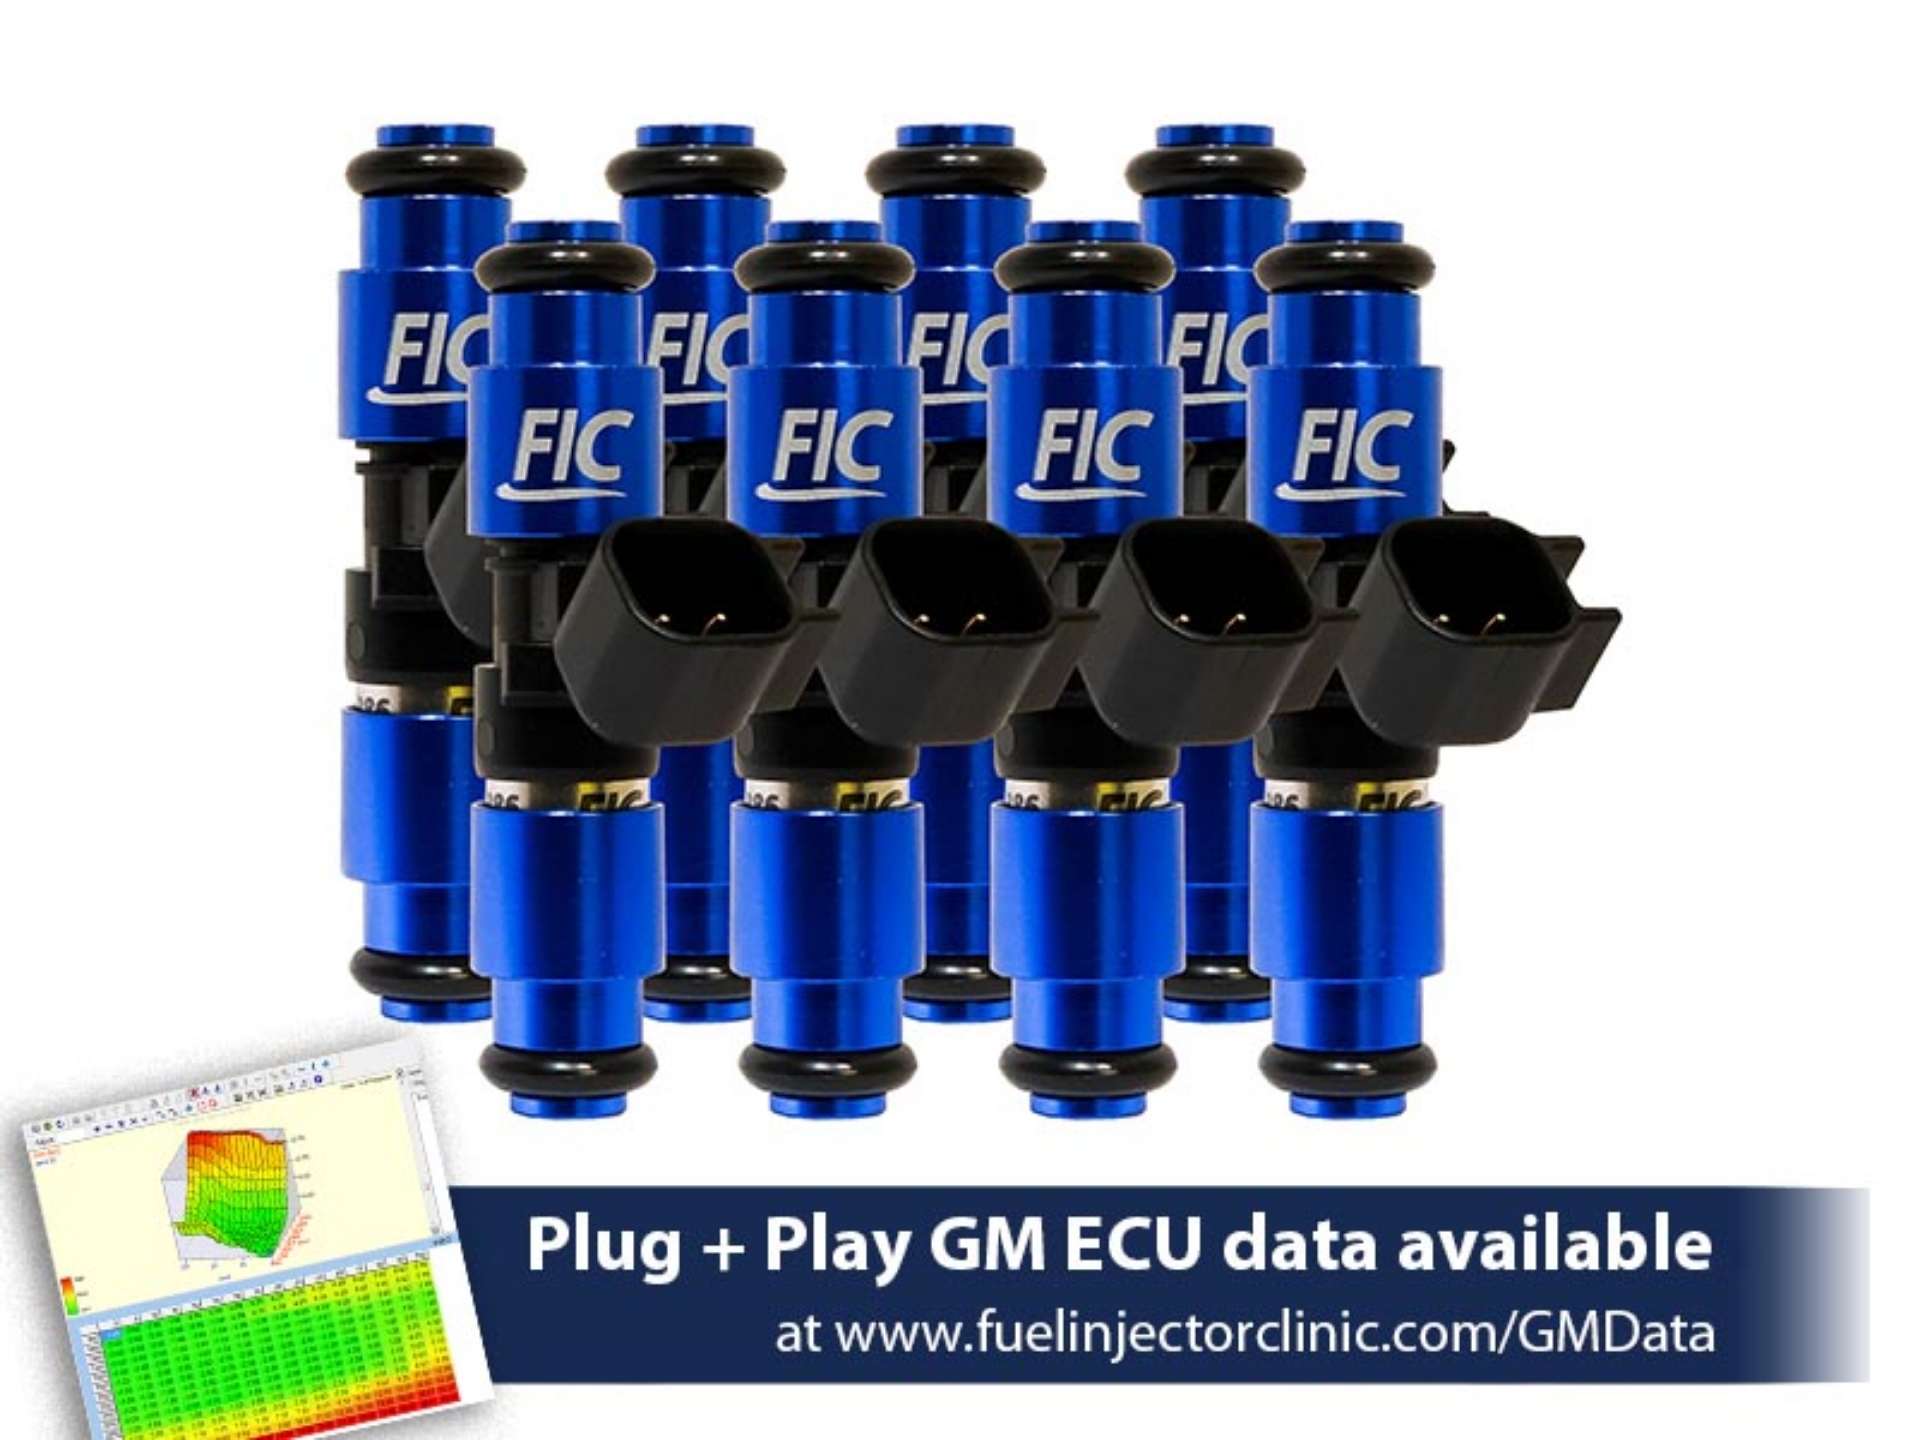 Picture of FIC1650cc (180 lbs/hr at OE 58 PSI fuel pressure) FIC Fuel Injector Clinic Injector Set for LT1, LT4 engines (High-Z)